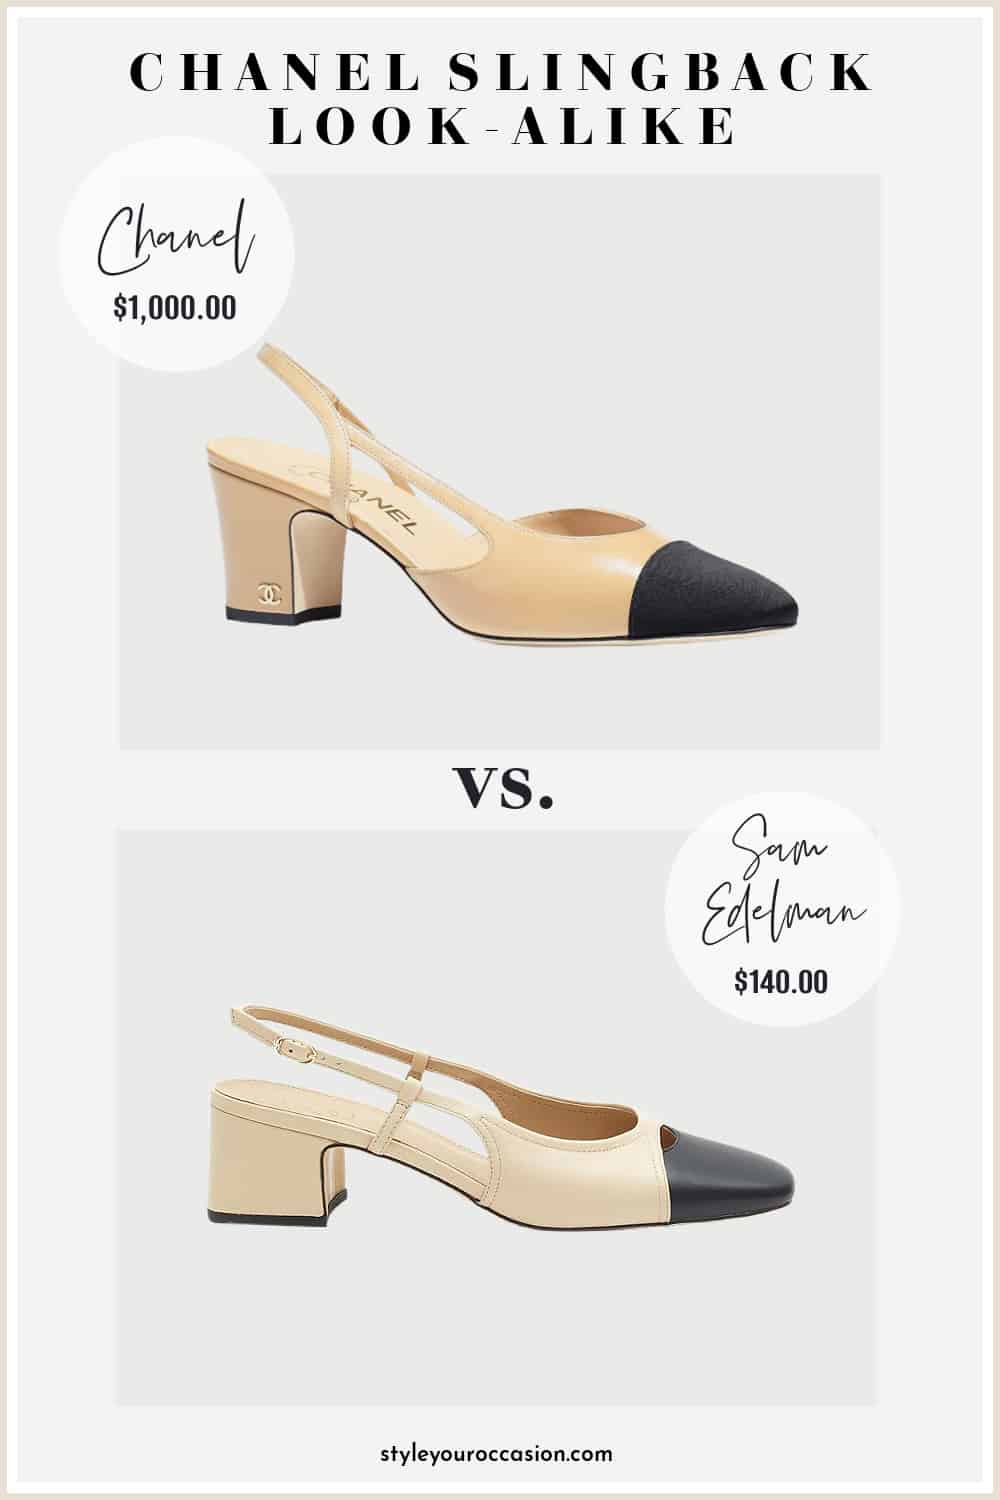 image comparing a Chanel slingback pump with a very similar look-alike shoe